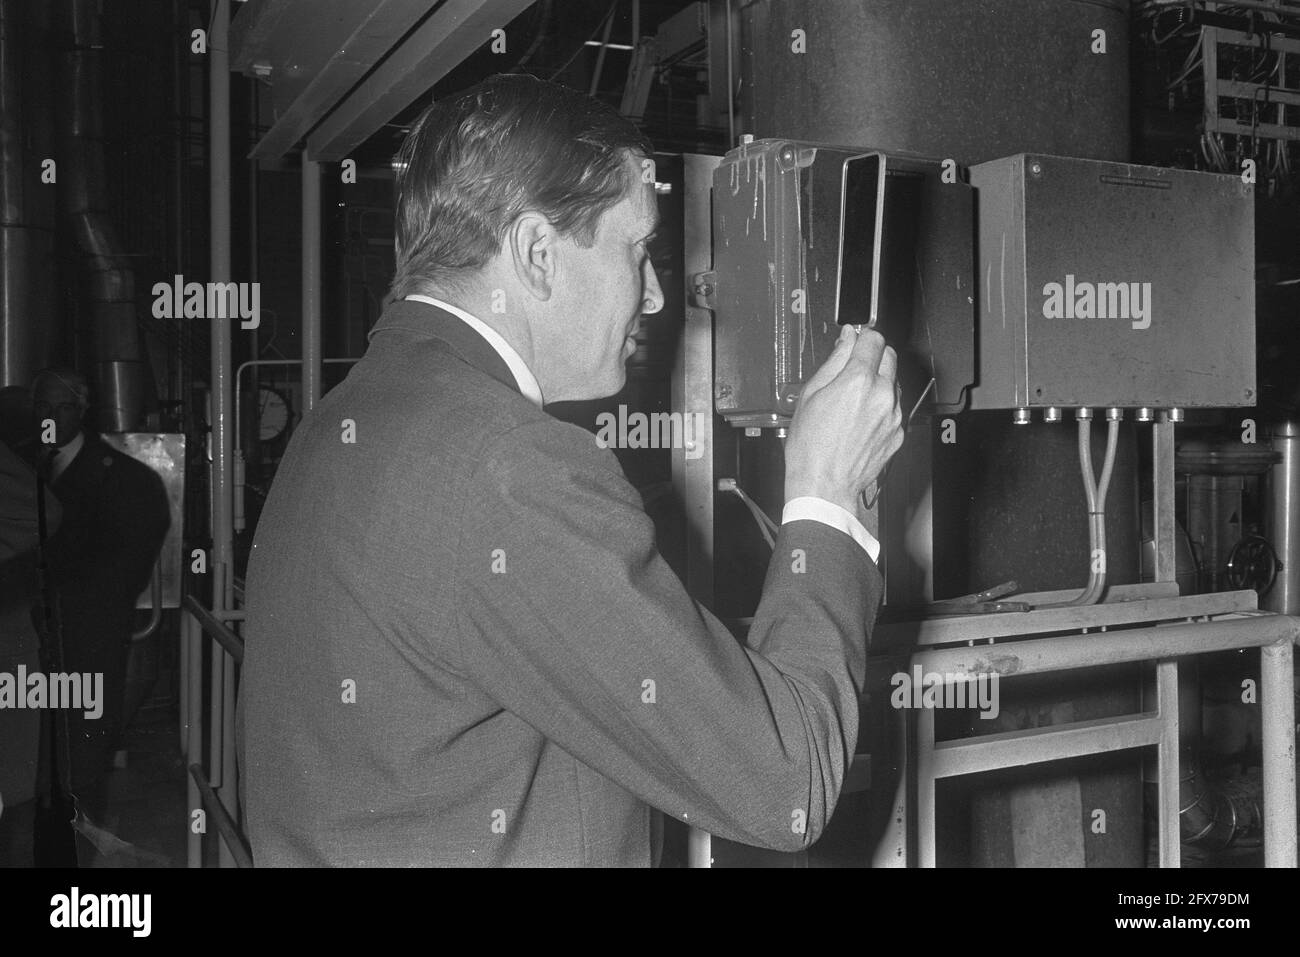 Prince Claus opened Centrale 2 at Velsen, Prince Claus looks through glass to the fire, 24 May 1967, The Netherlands, 20th century press agency photo, news to remember, documentary, historic photography 1945-1990, visual stories, human history of the Twentieth Century, capturing moments in time Stock Photo